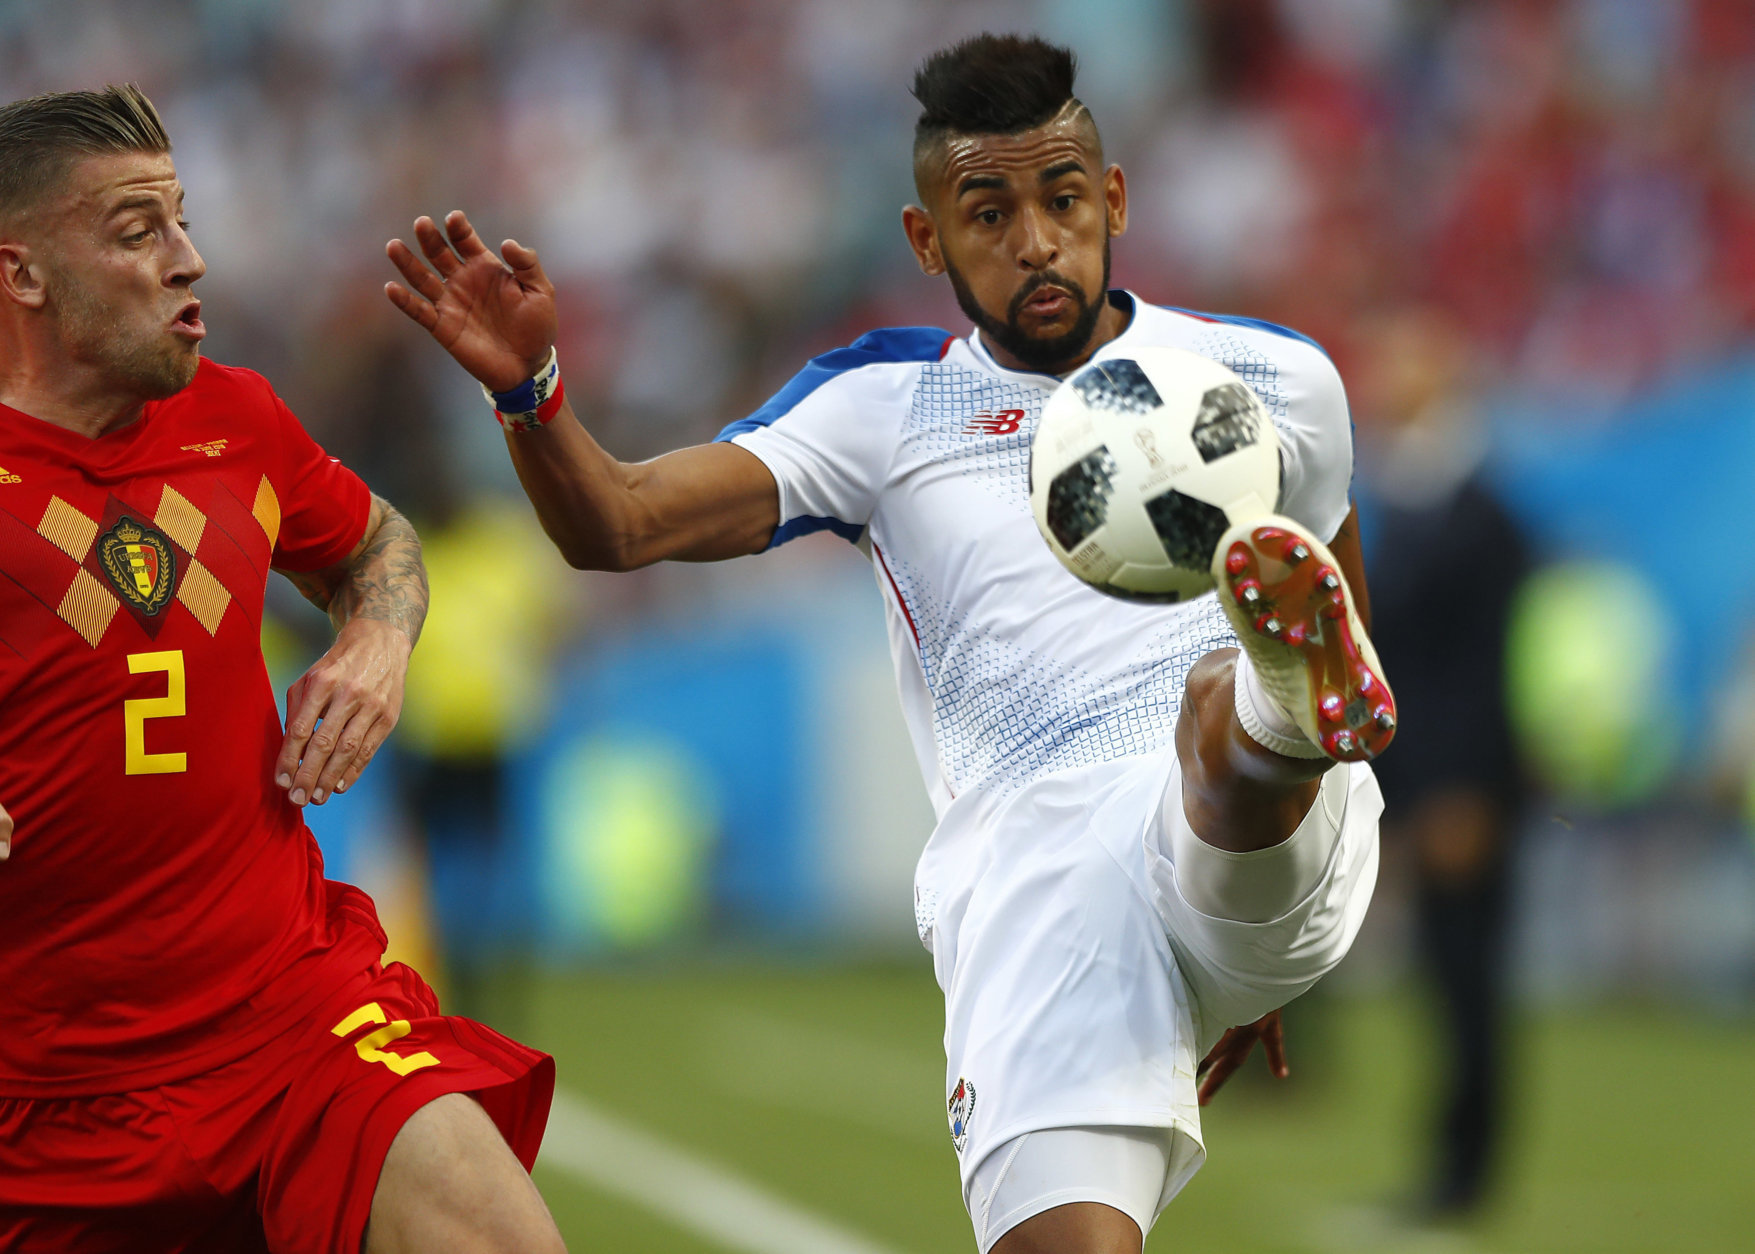 Panama's Anibal Godoy, right, and Belgium's Toby Alderweireld challenge for the ball during the group G match between Belgium and Panama at the 2018 soccer World Cup in the Fisht Stadium in Sochi, Russia, Monday, June 18, 2018. (AP Photo/Matthias Schrader)